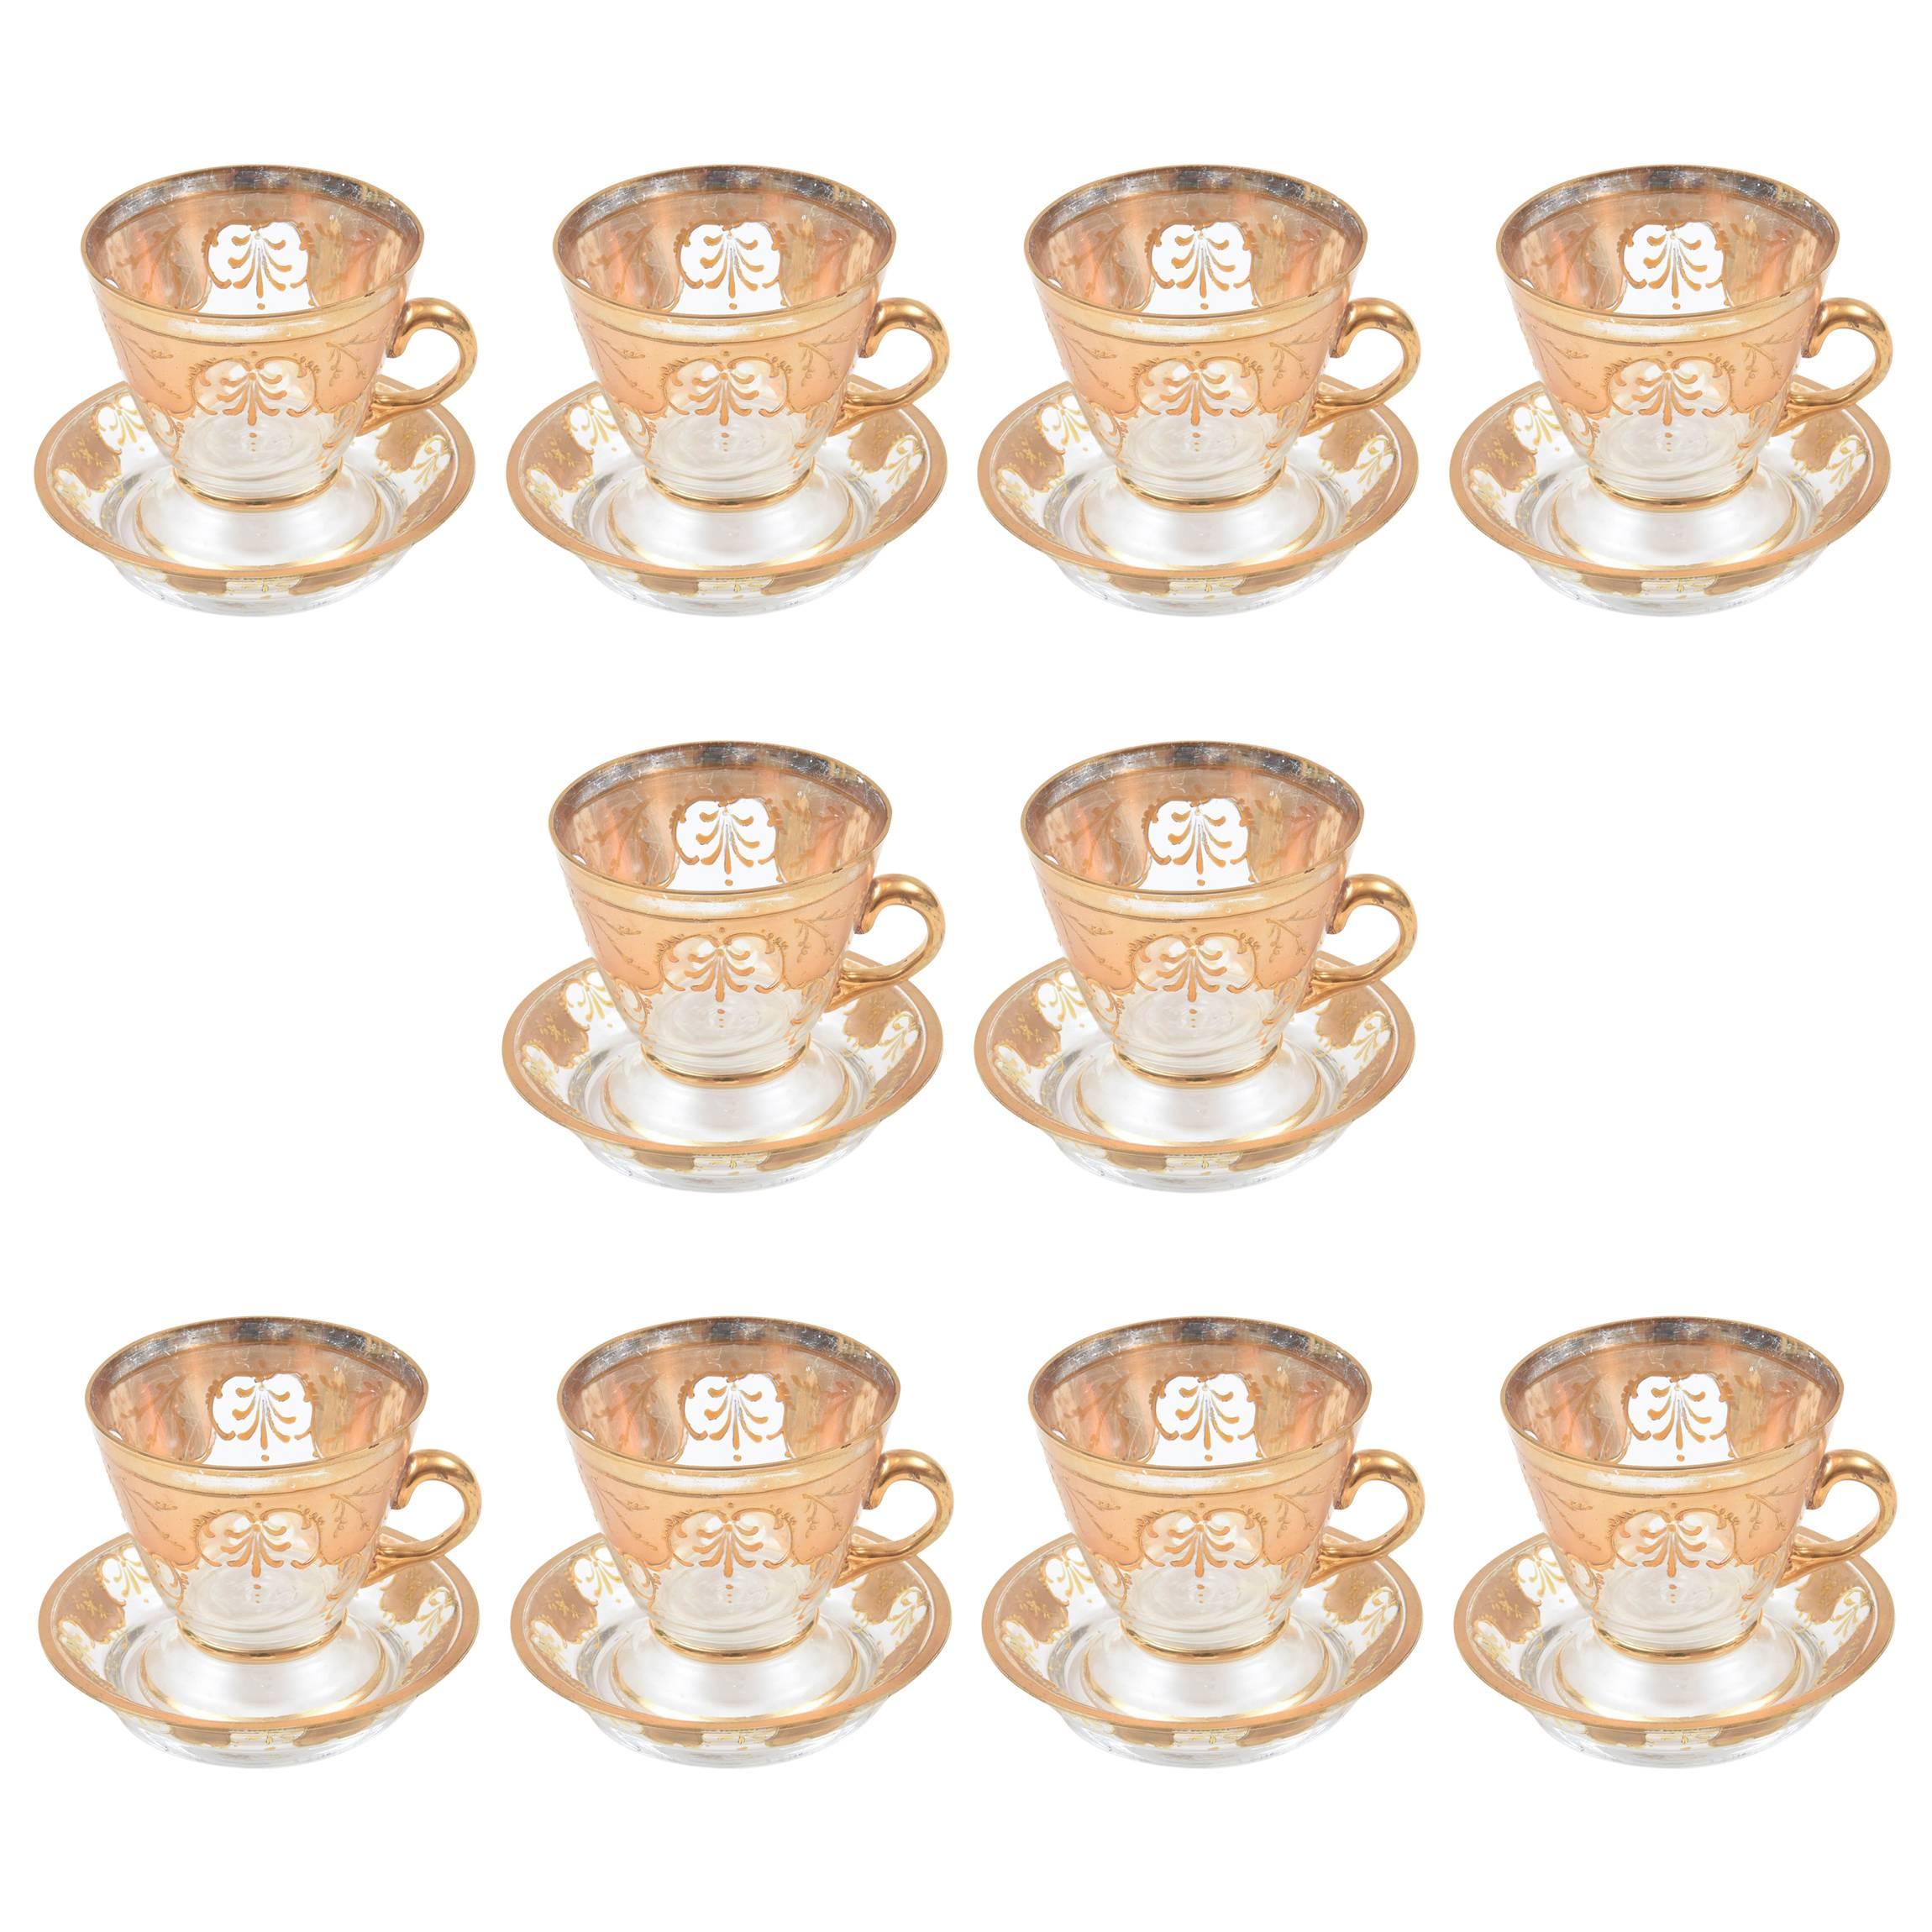 Ten Beautiful Gilt Glass Demi Tasse Cups and Saucers. Antique & Great Condition